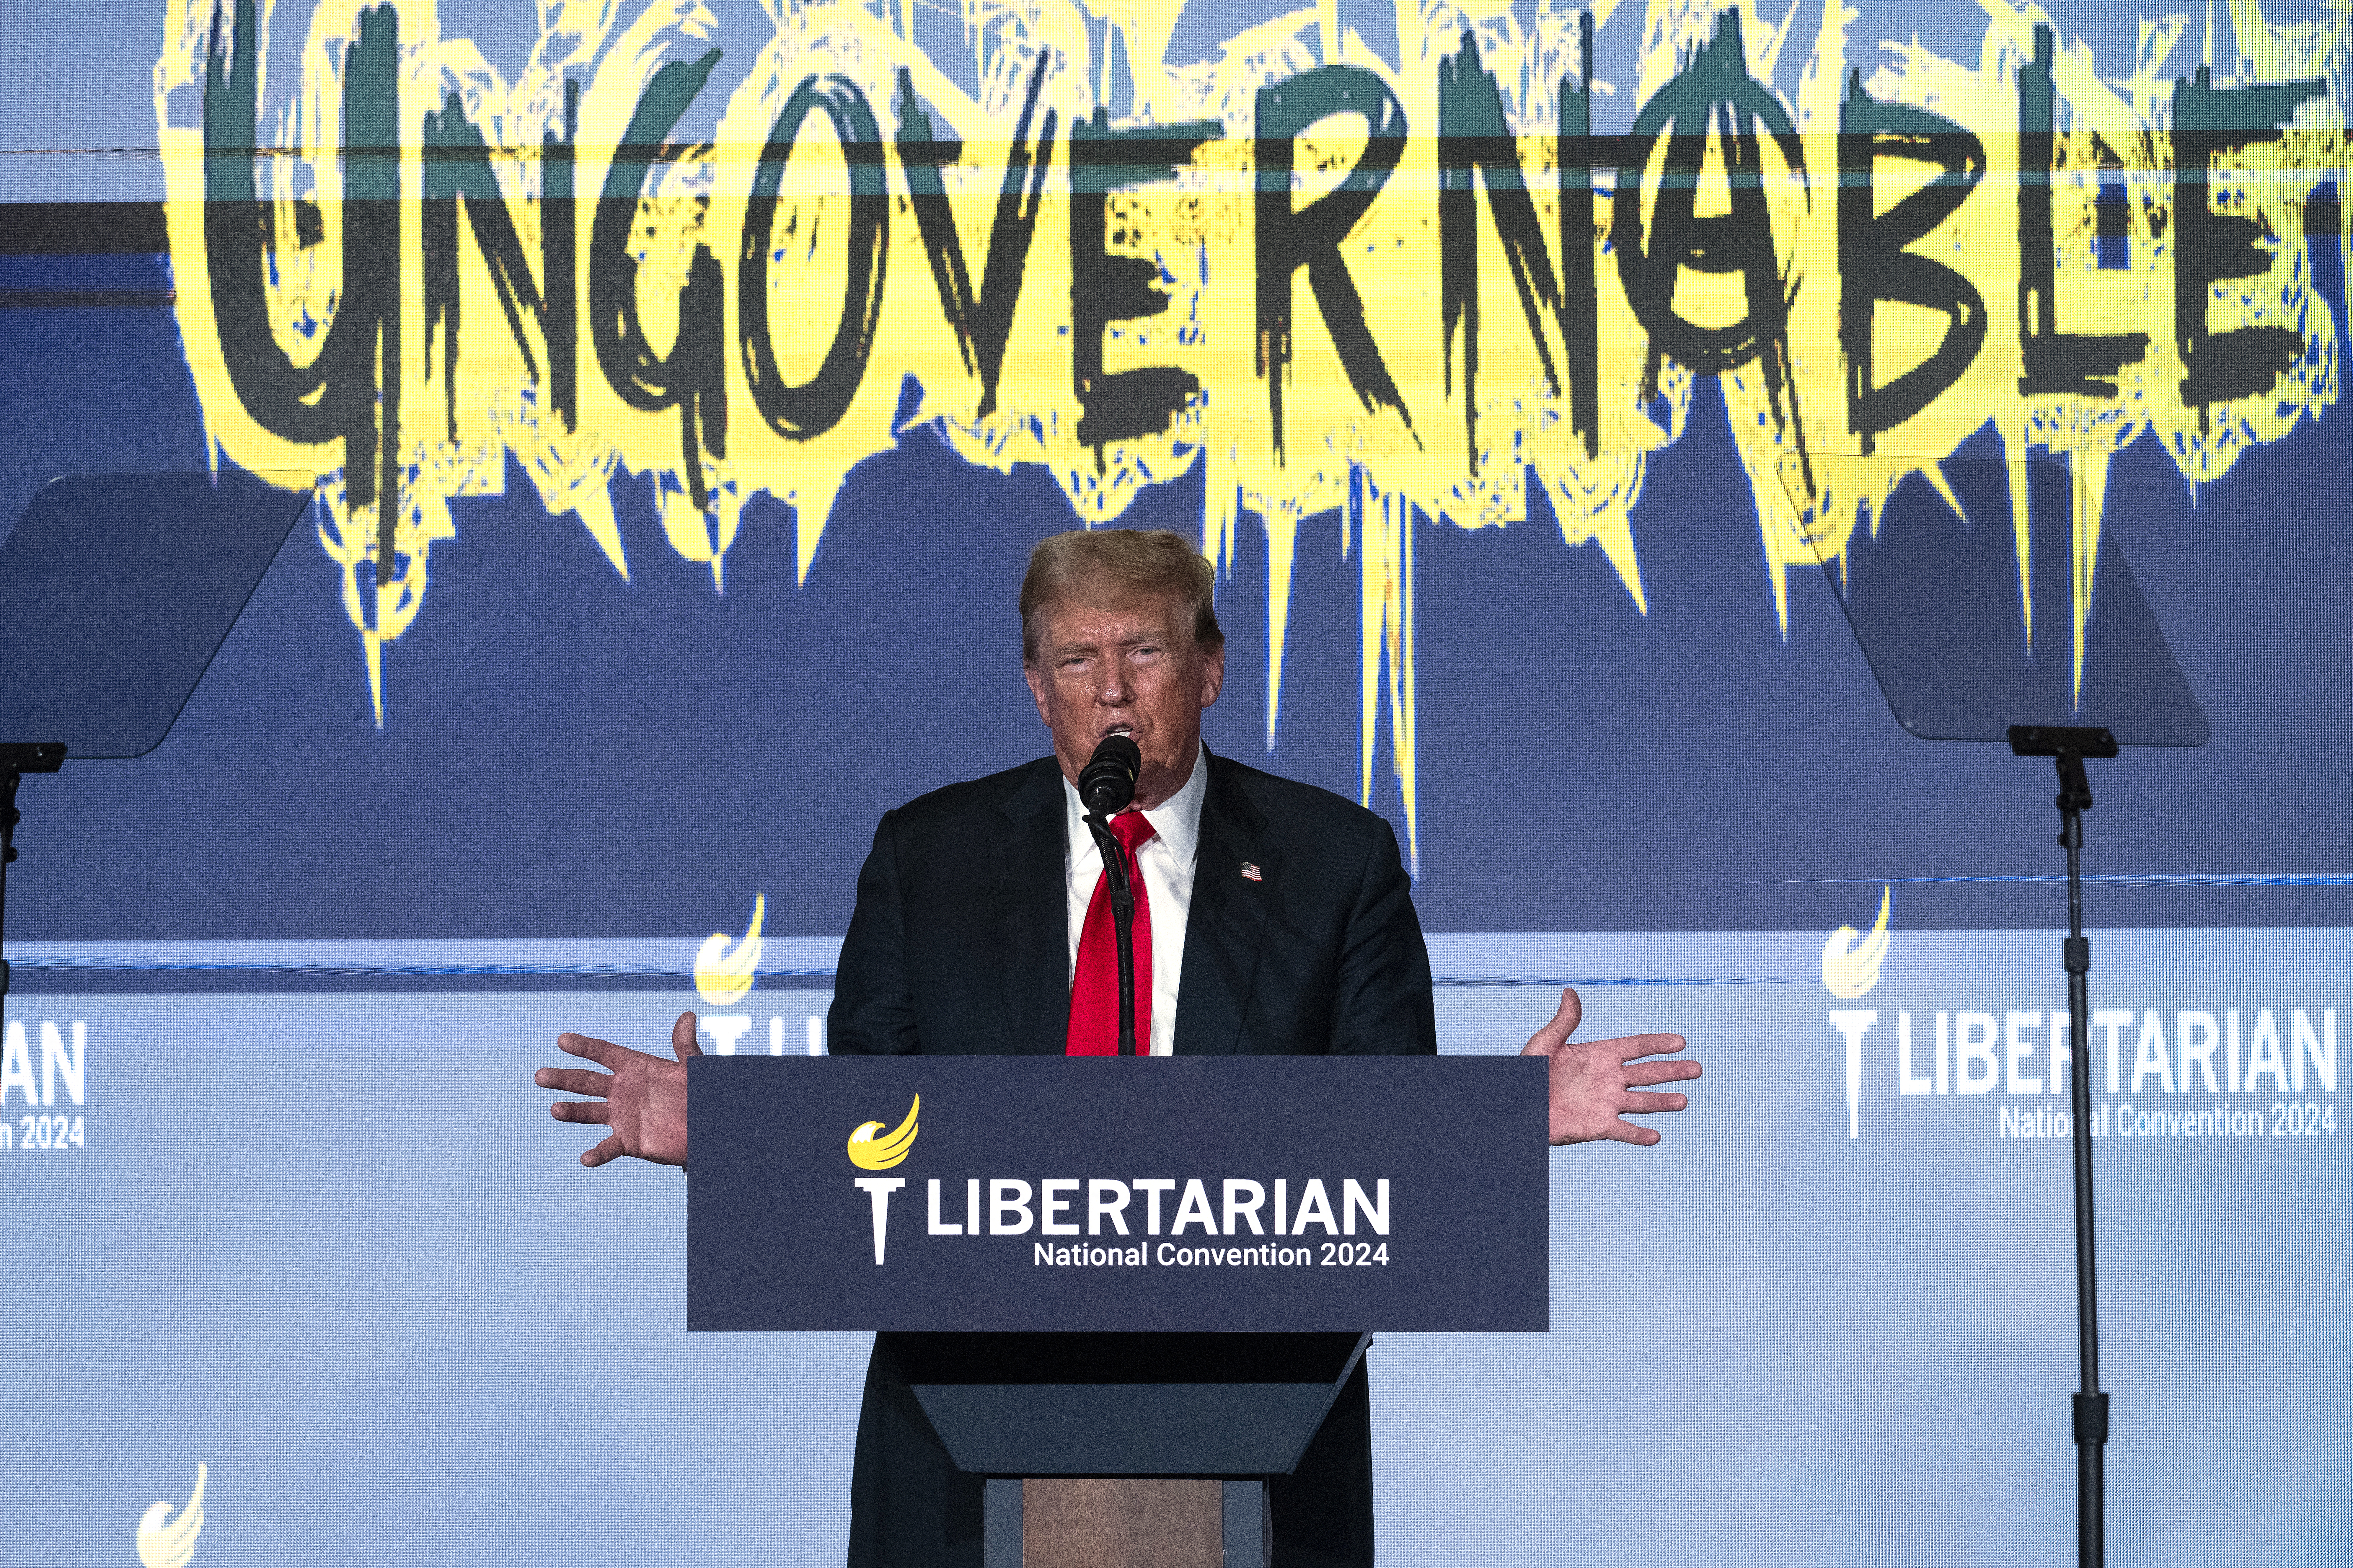 Former US President and Republican presidential candidate Donald Trump addresses the Libertarian National Convention in Washington,